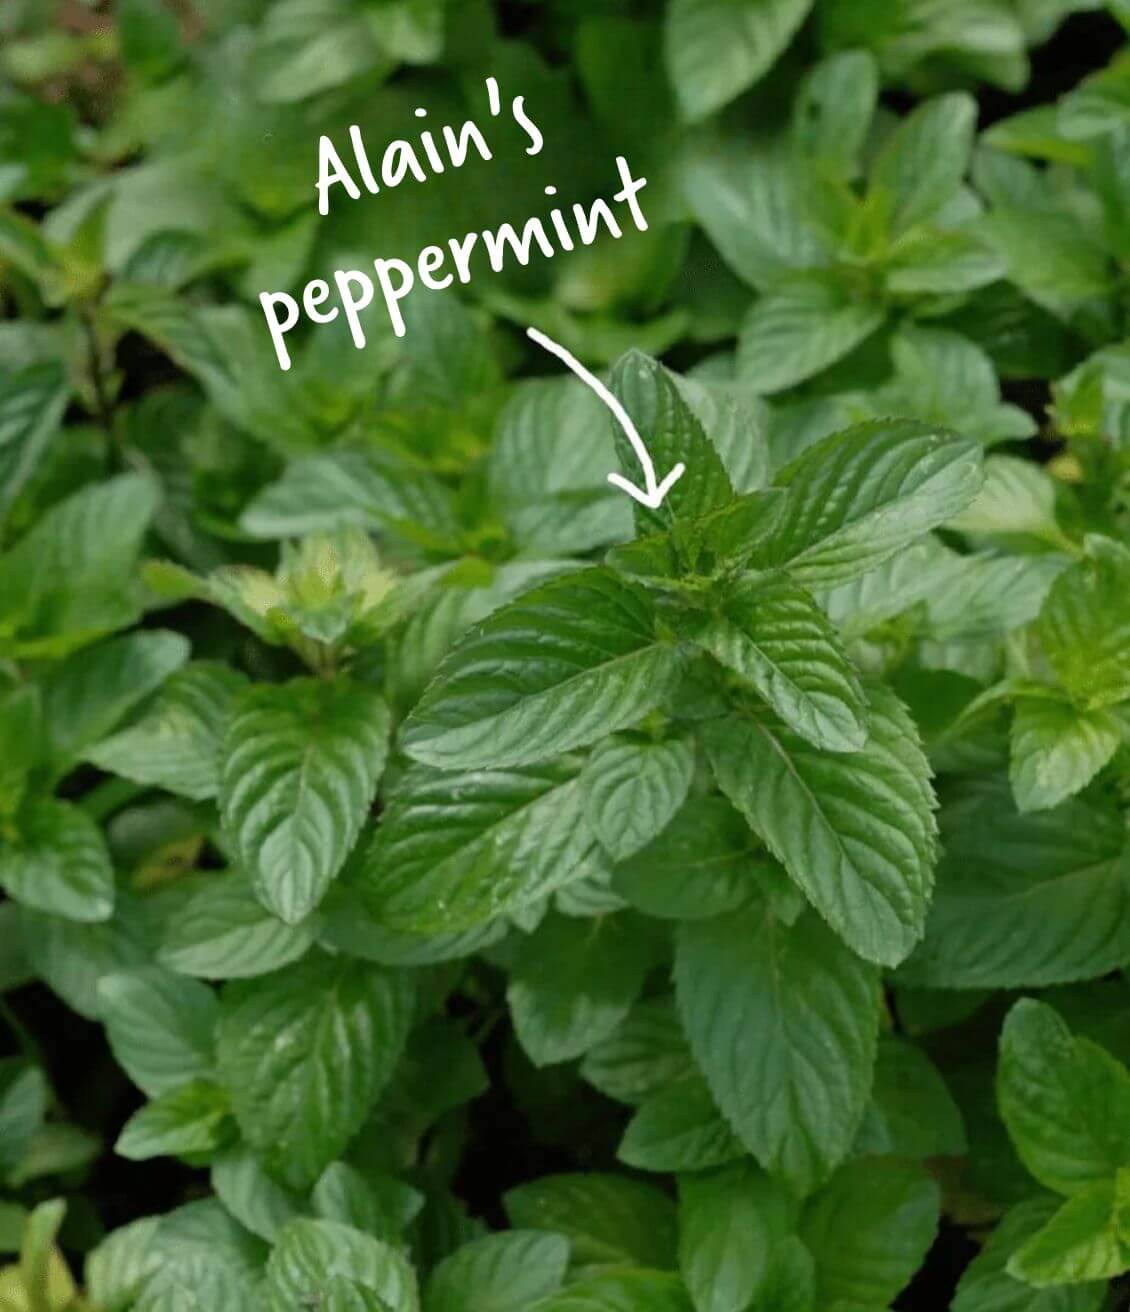 Zoom on the peppermint